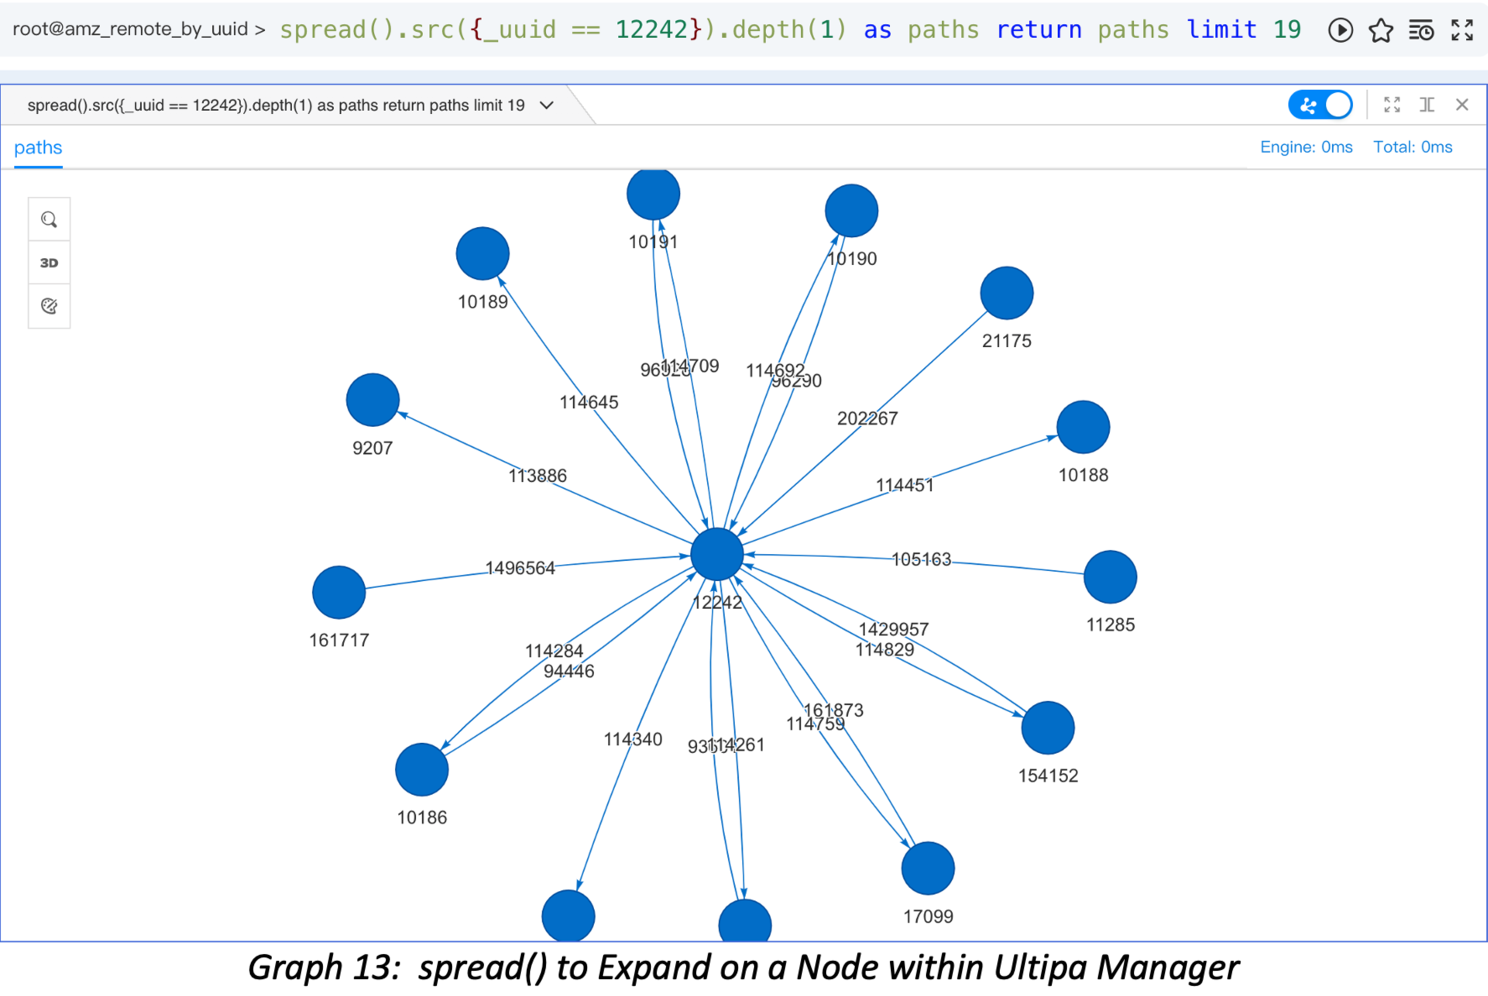 Spread() to Expand on a Node within Ultipa Manager.